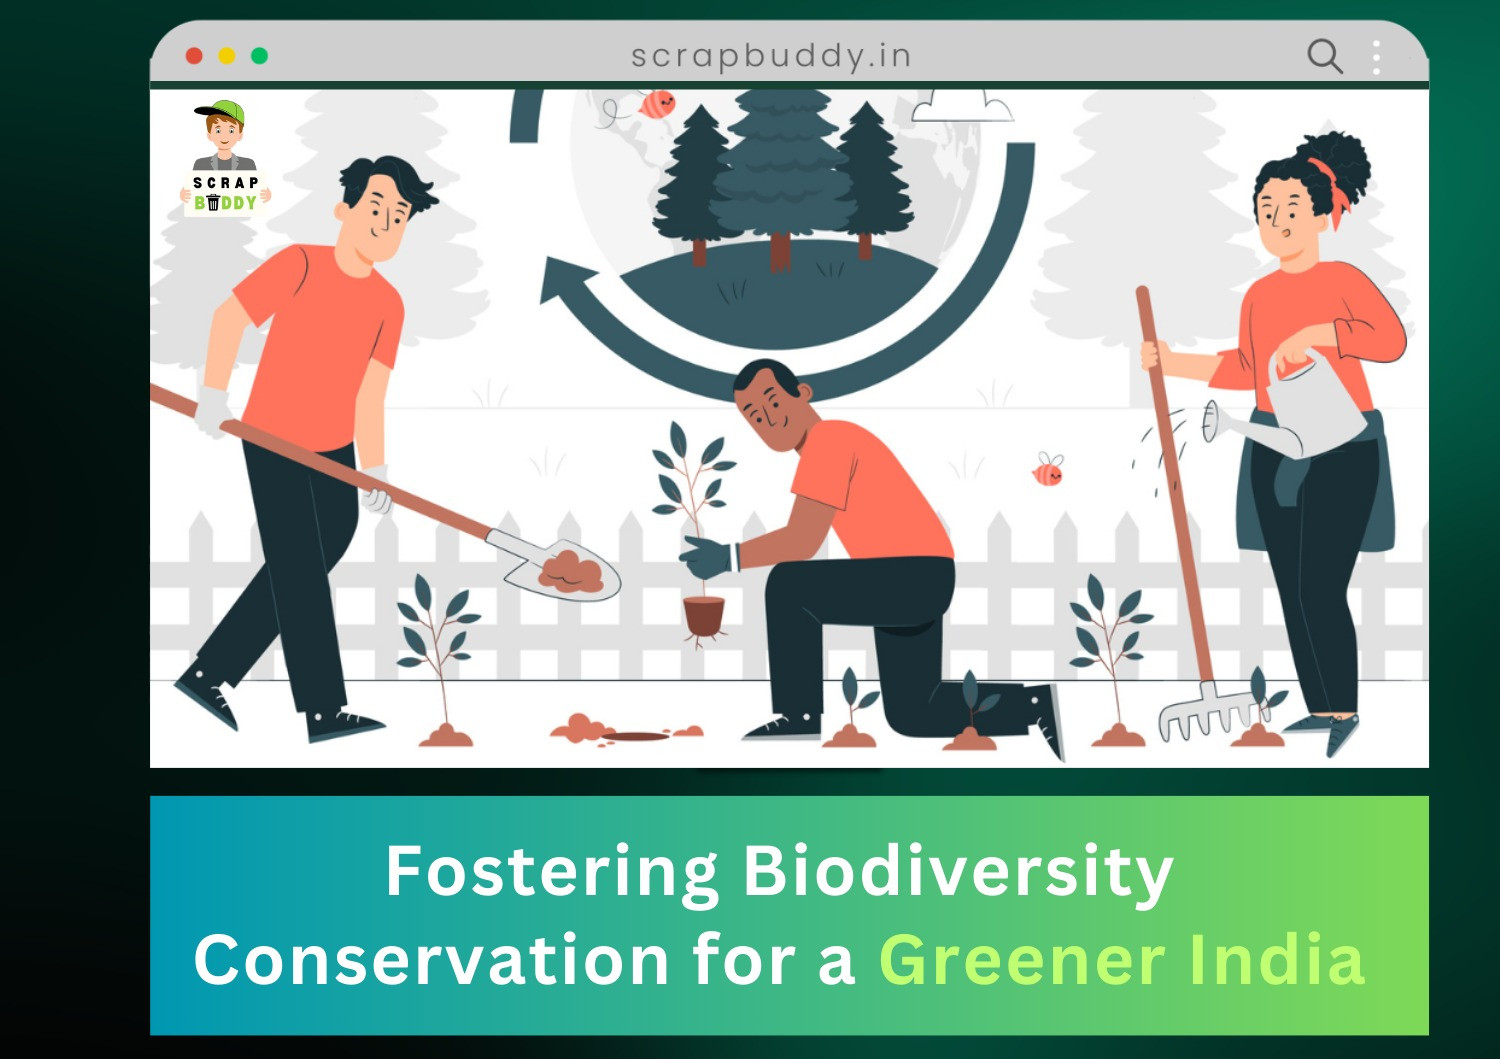 "ScrapBuddy: Fostering Biodiversity Conservation for a Greener India"